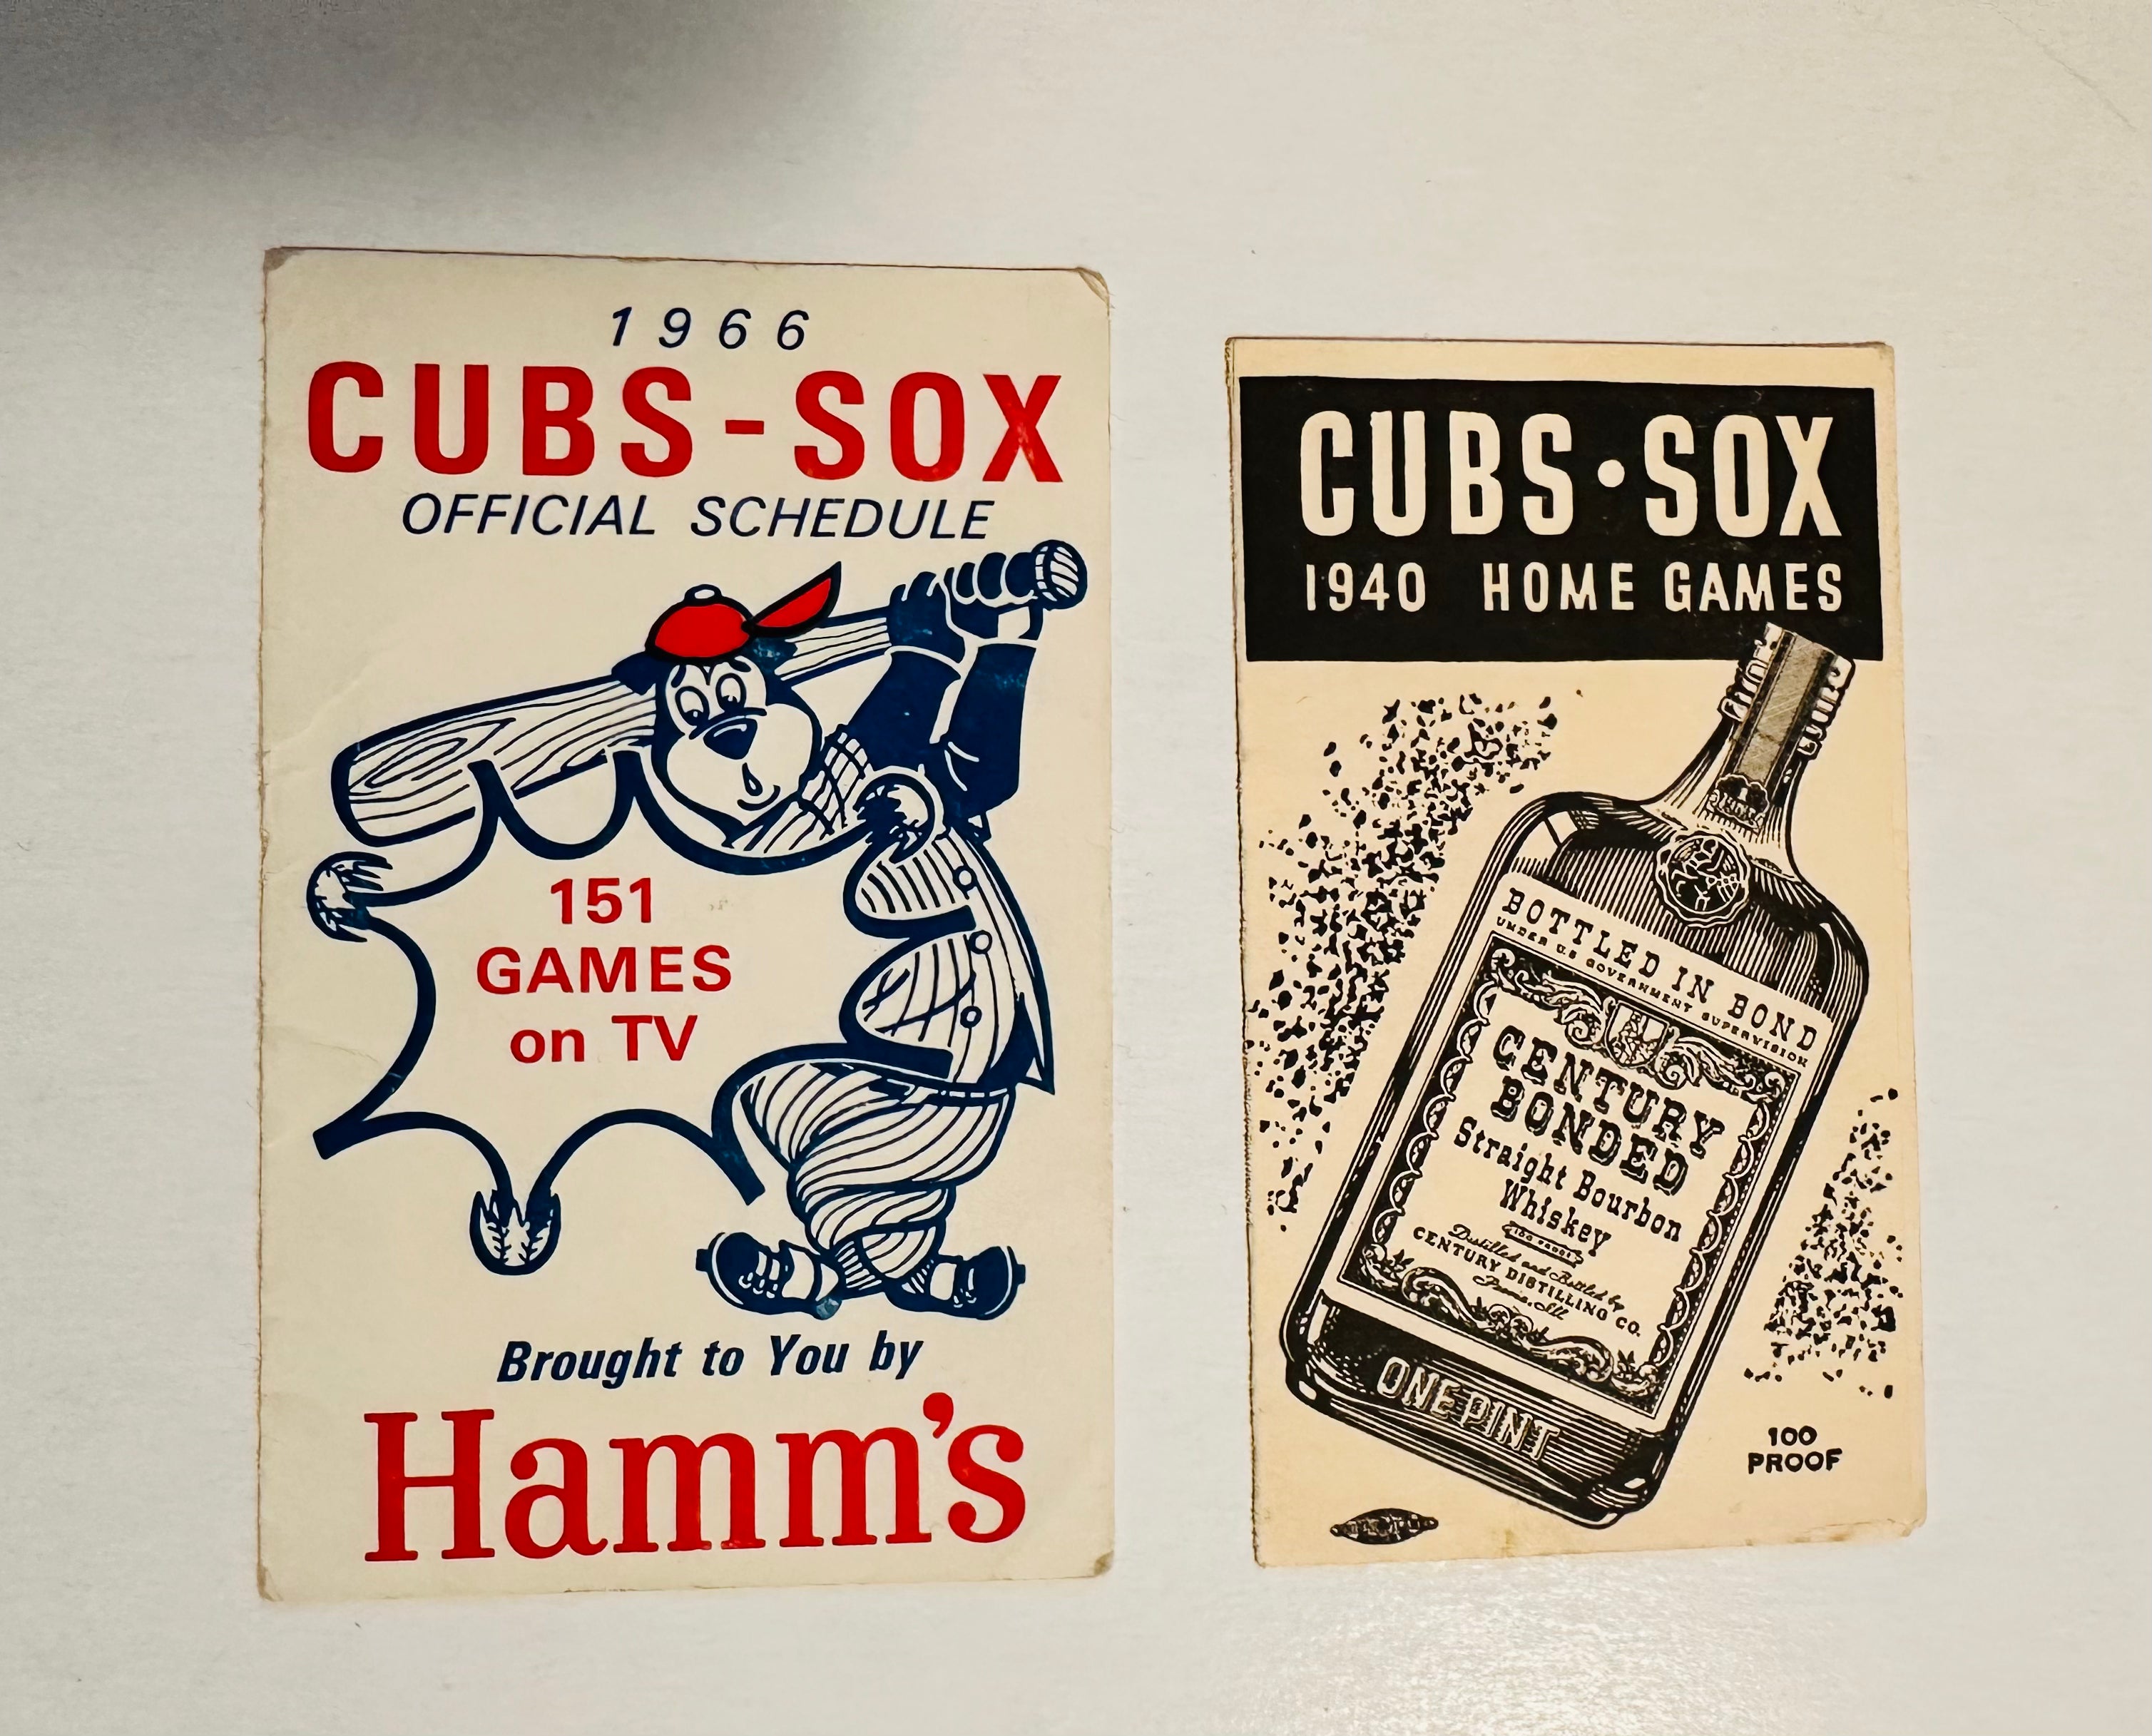 Chicago Cubs baseball vintage schedules 1940, 1966